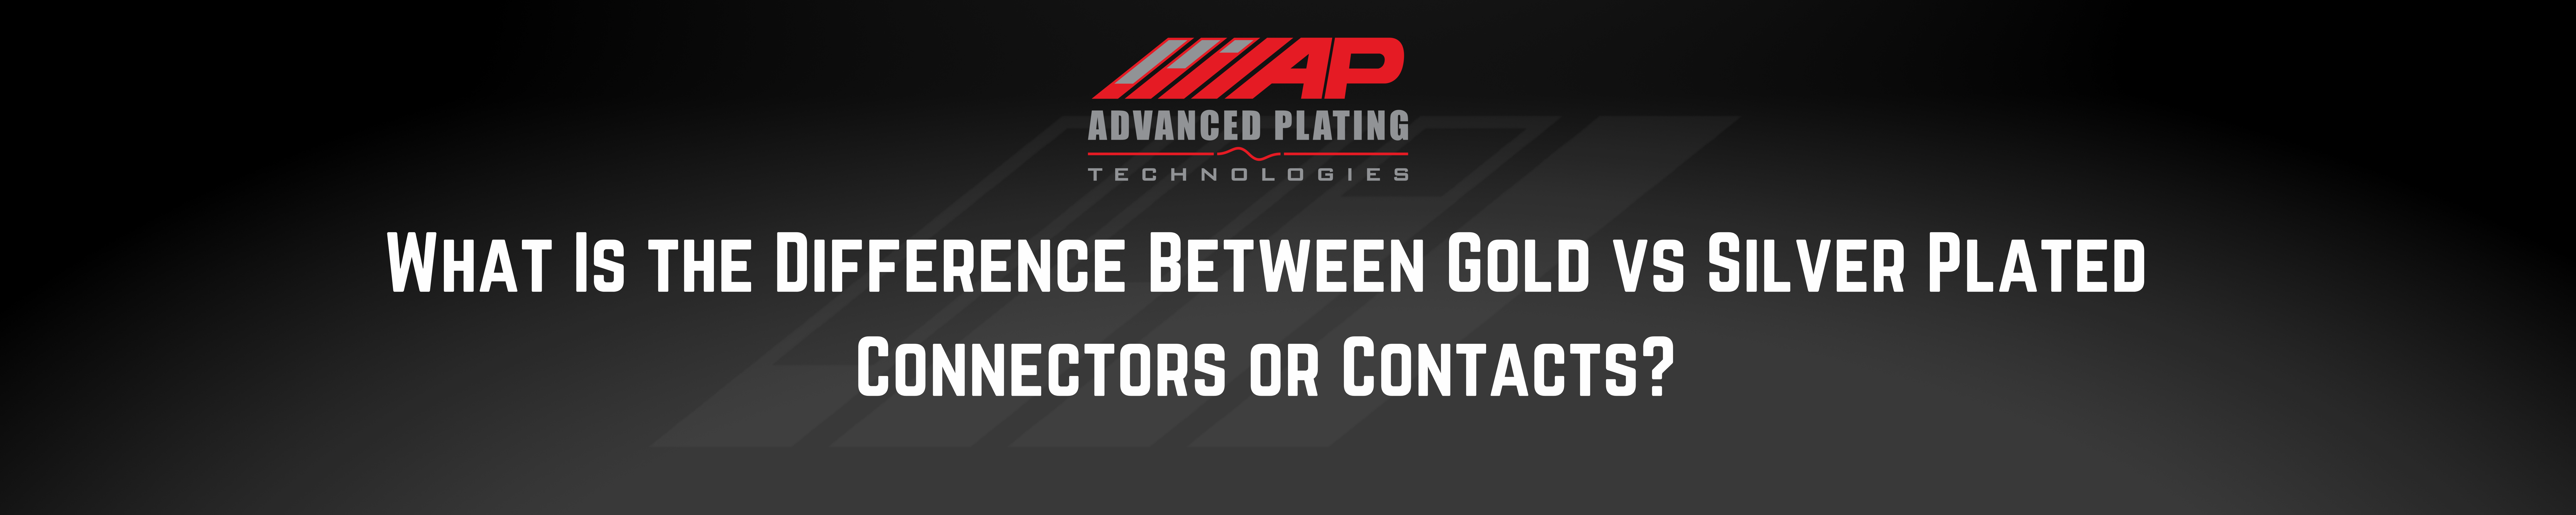 WHAT IS THE DIFFERENCE BETWEEN GOLD VS SILVER PLATED CONNECTORS OR CONTACTS?